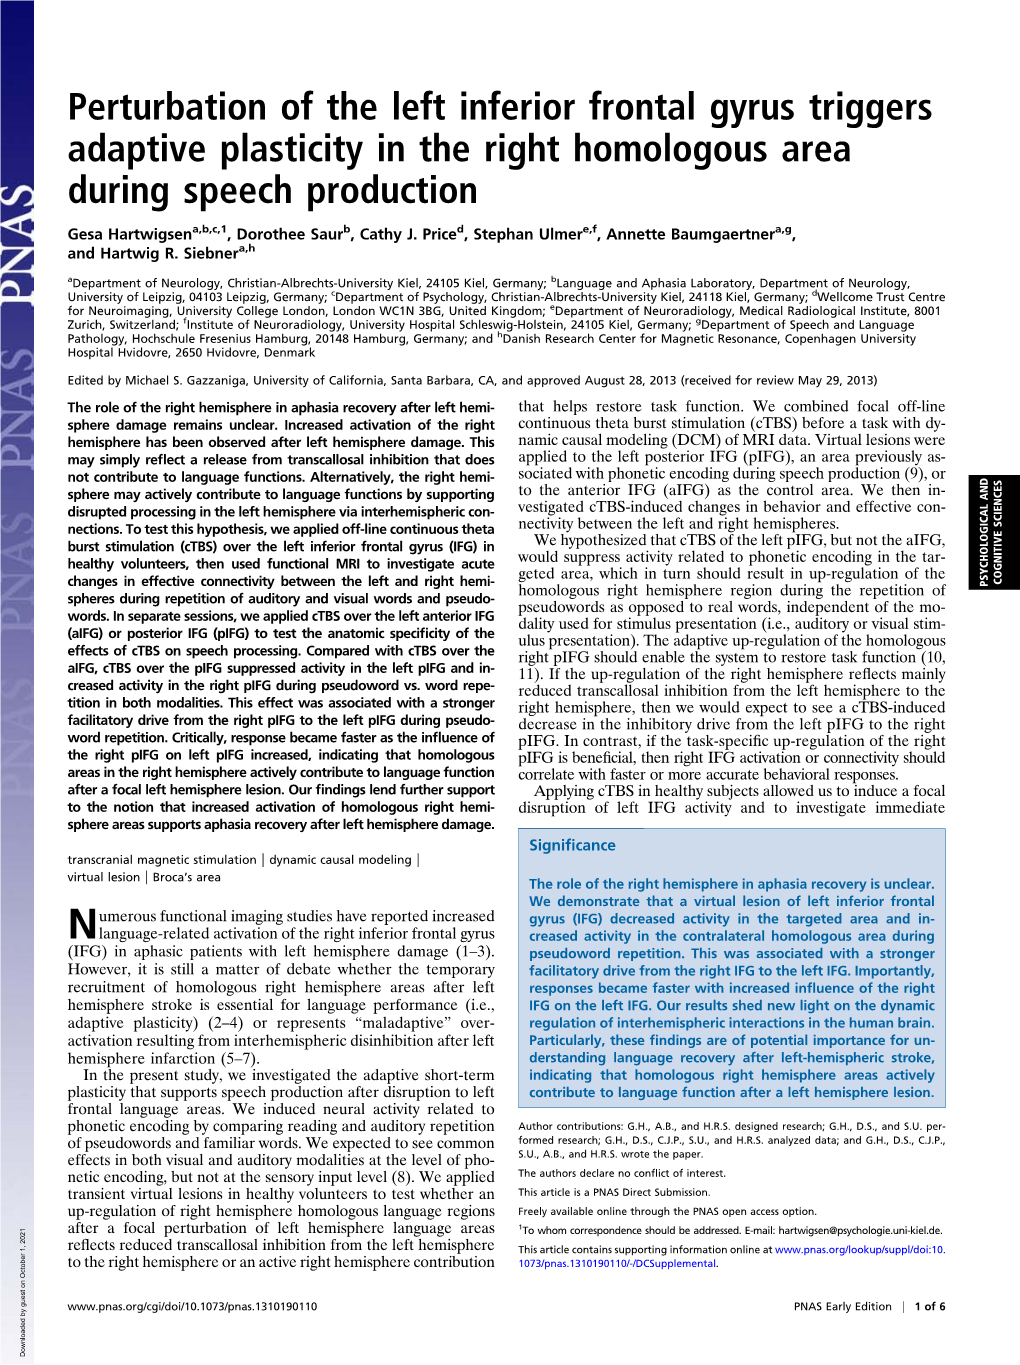 Perturbation of the Left Inferior Frontal Gyrus Triggers Adaptive Plasticity in the Right Homologous Area During Speech Production